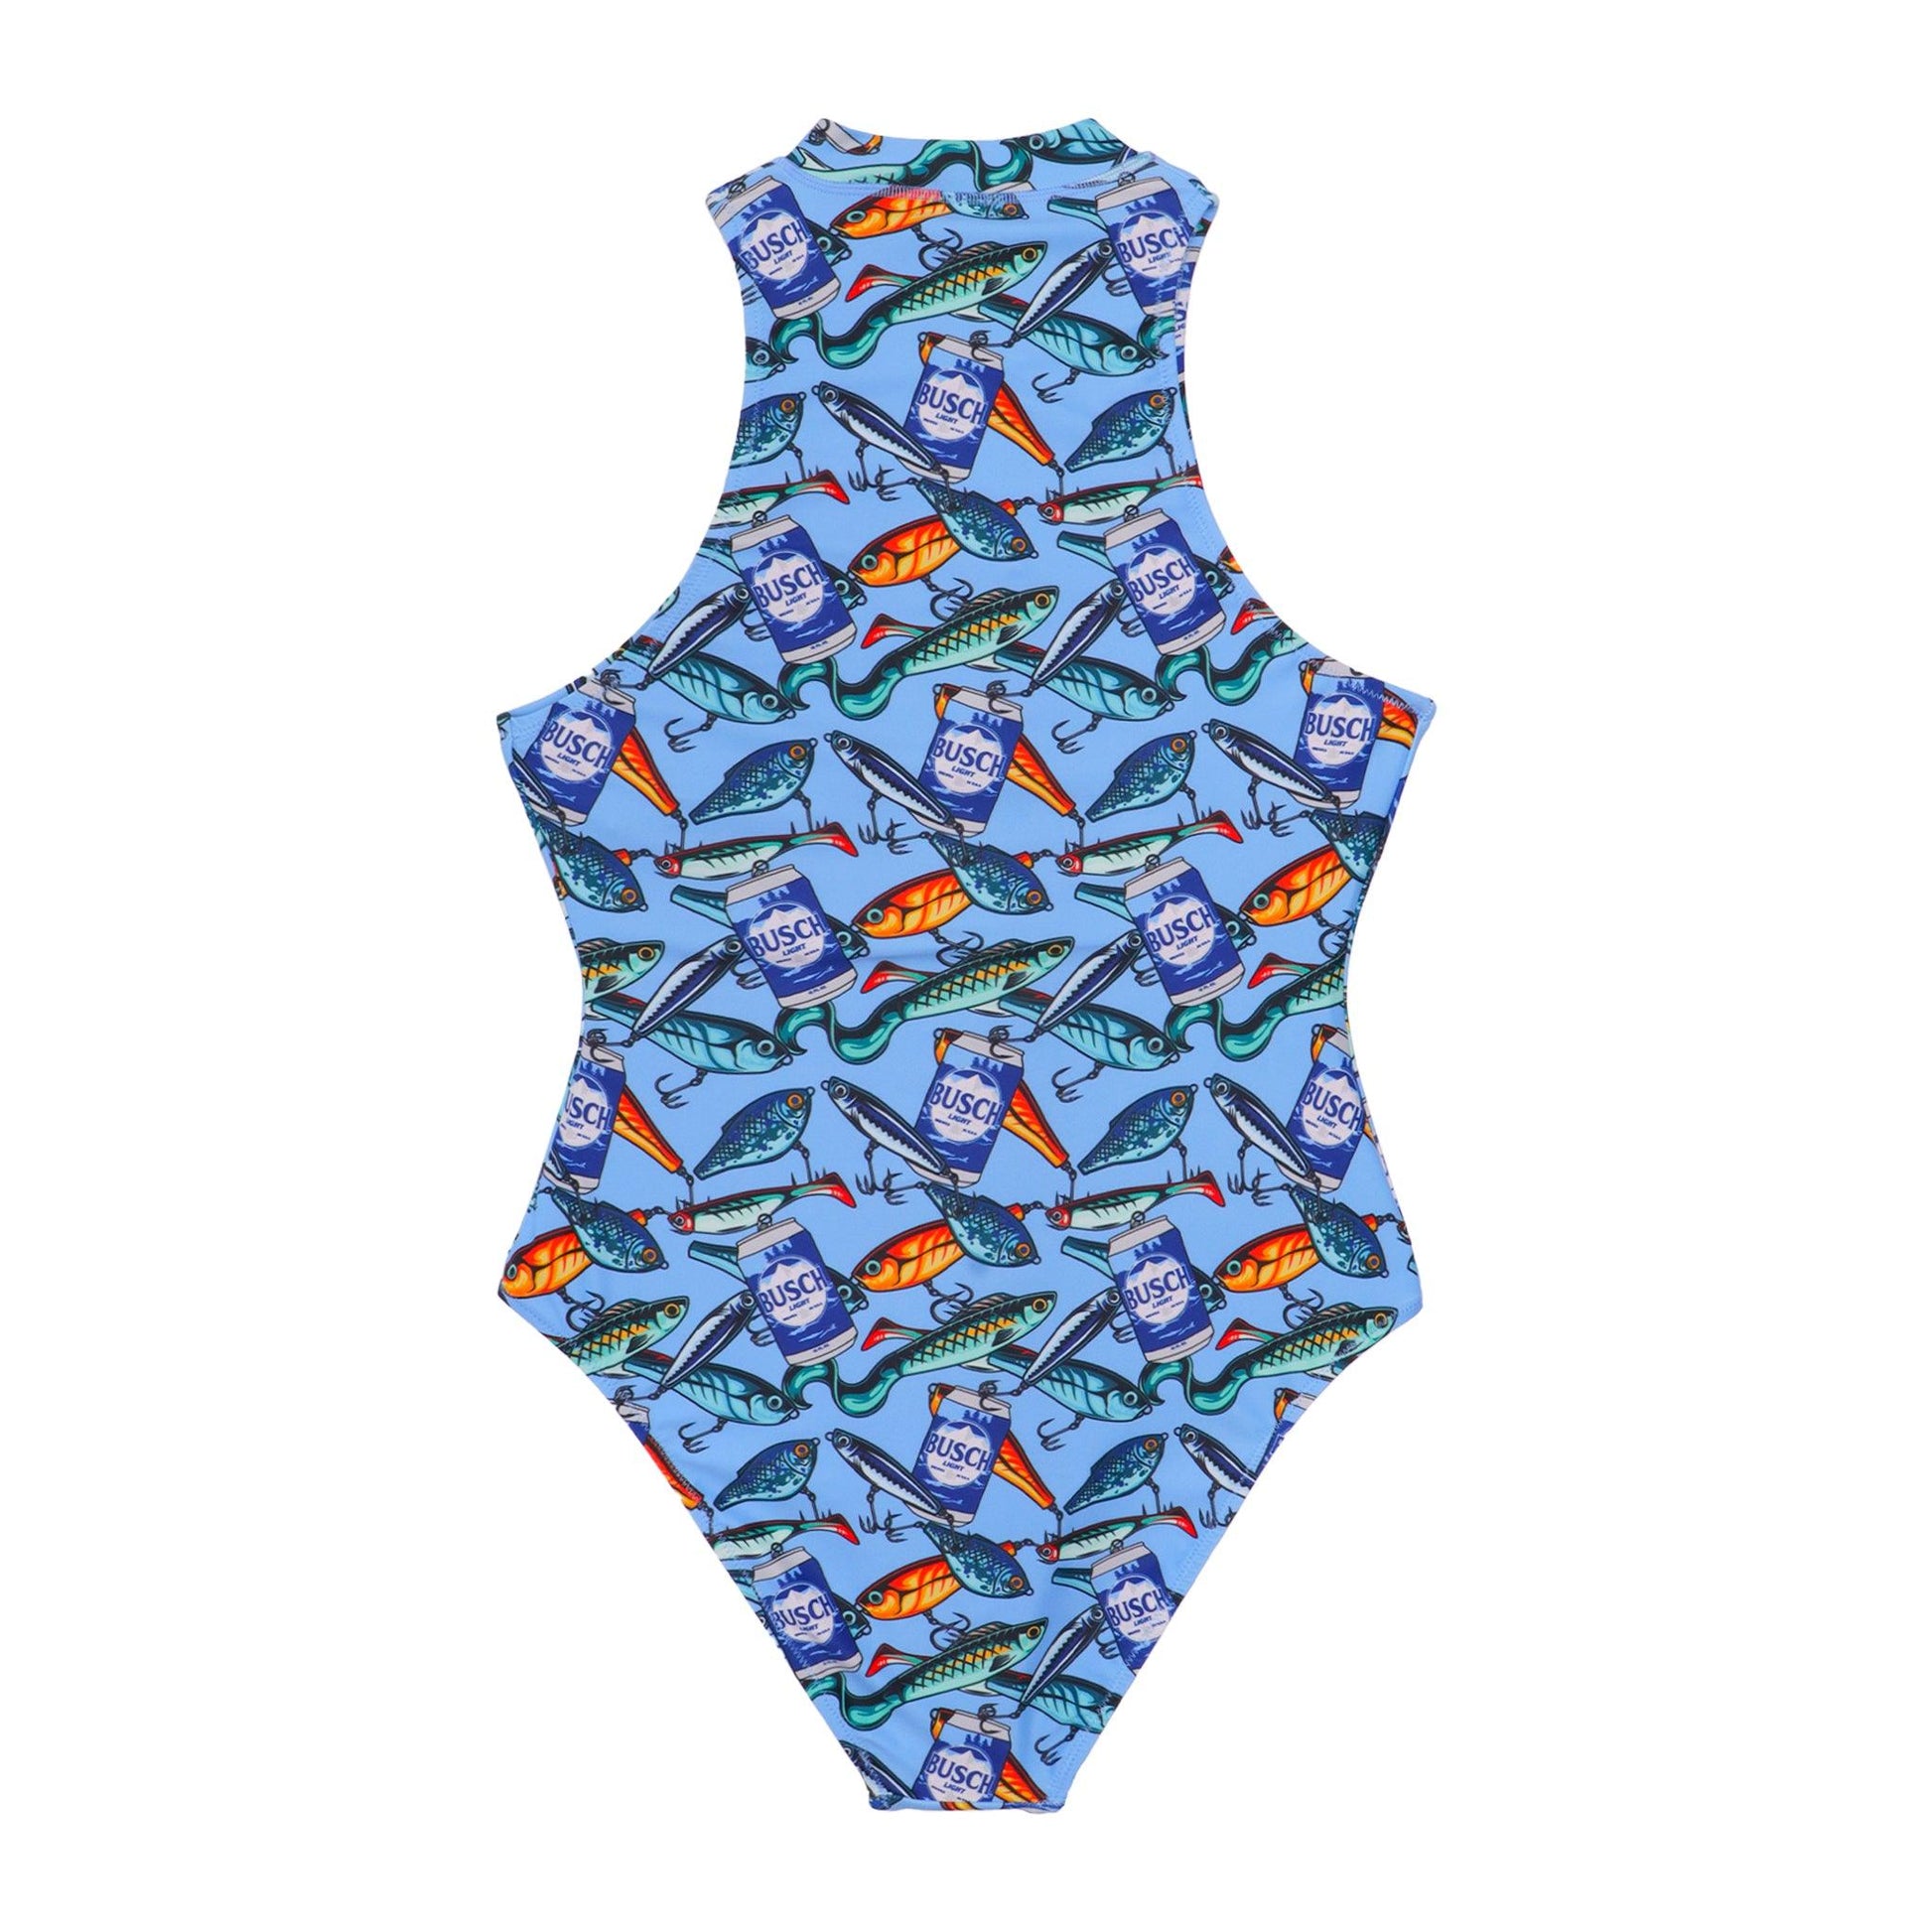 back of swimsuit - no decoration other than scatter print